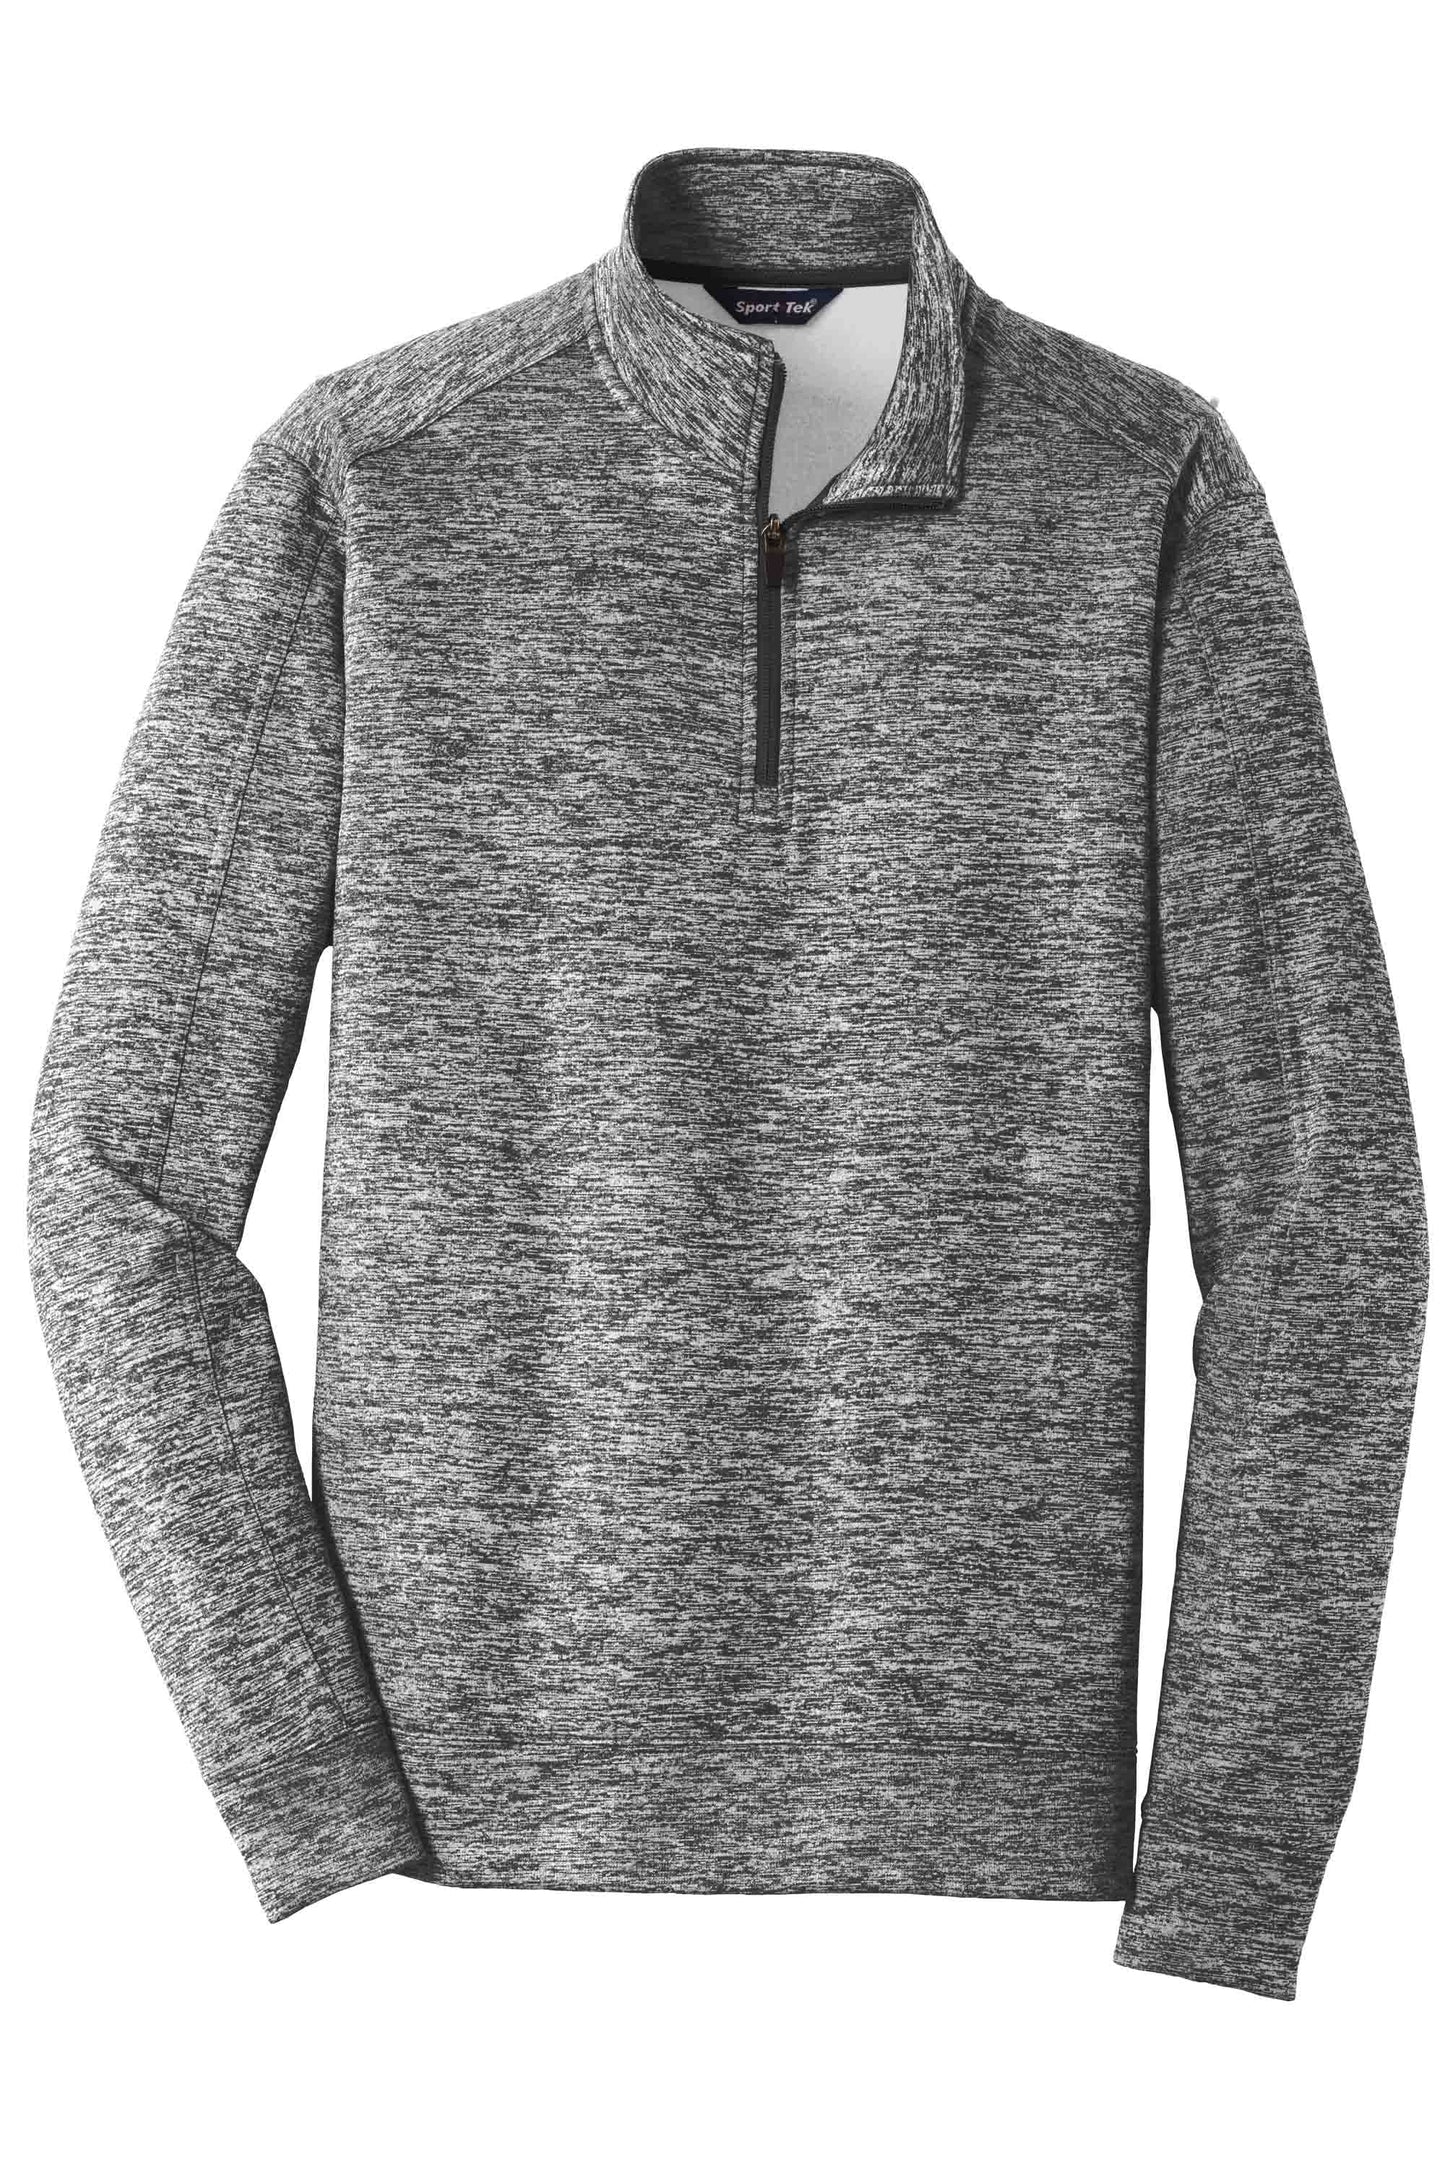 Electric Performance 1/4 Zip Pullover